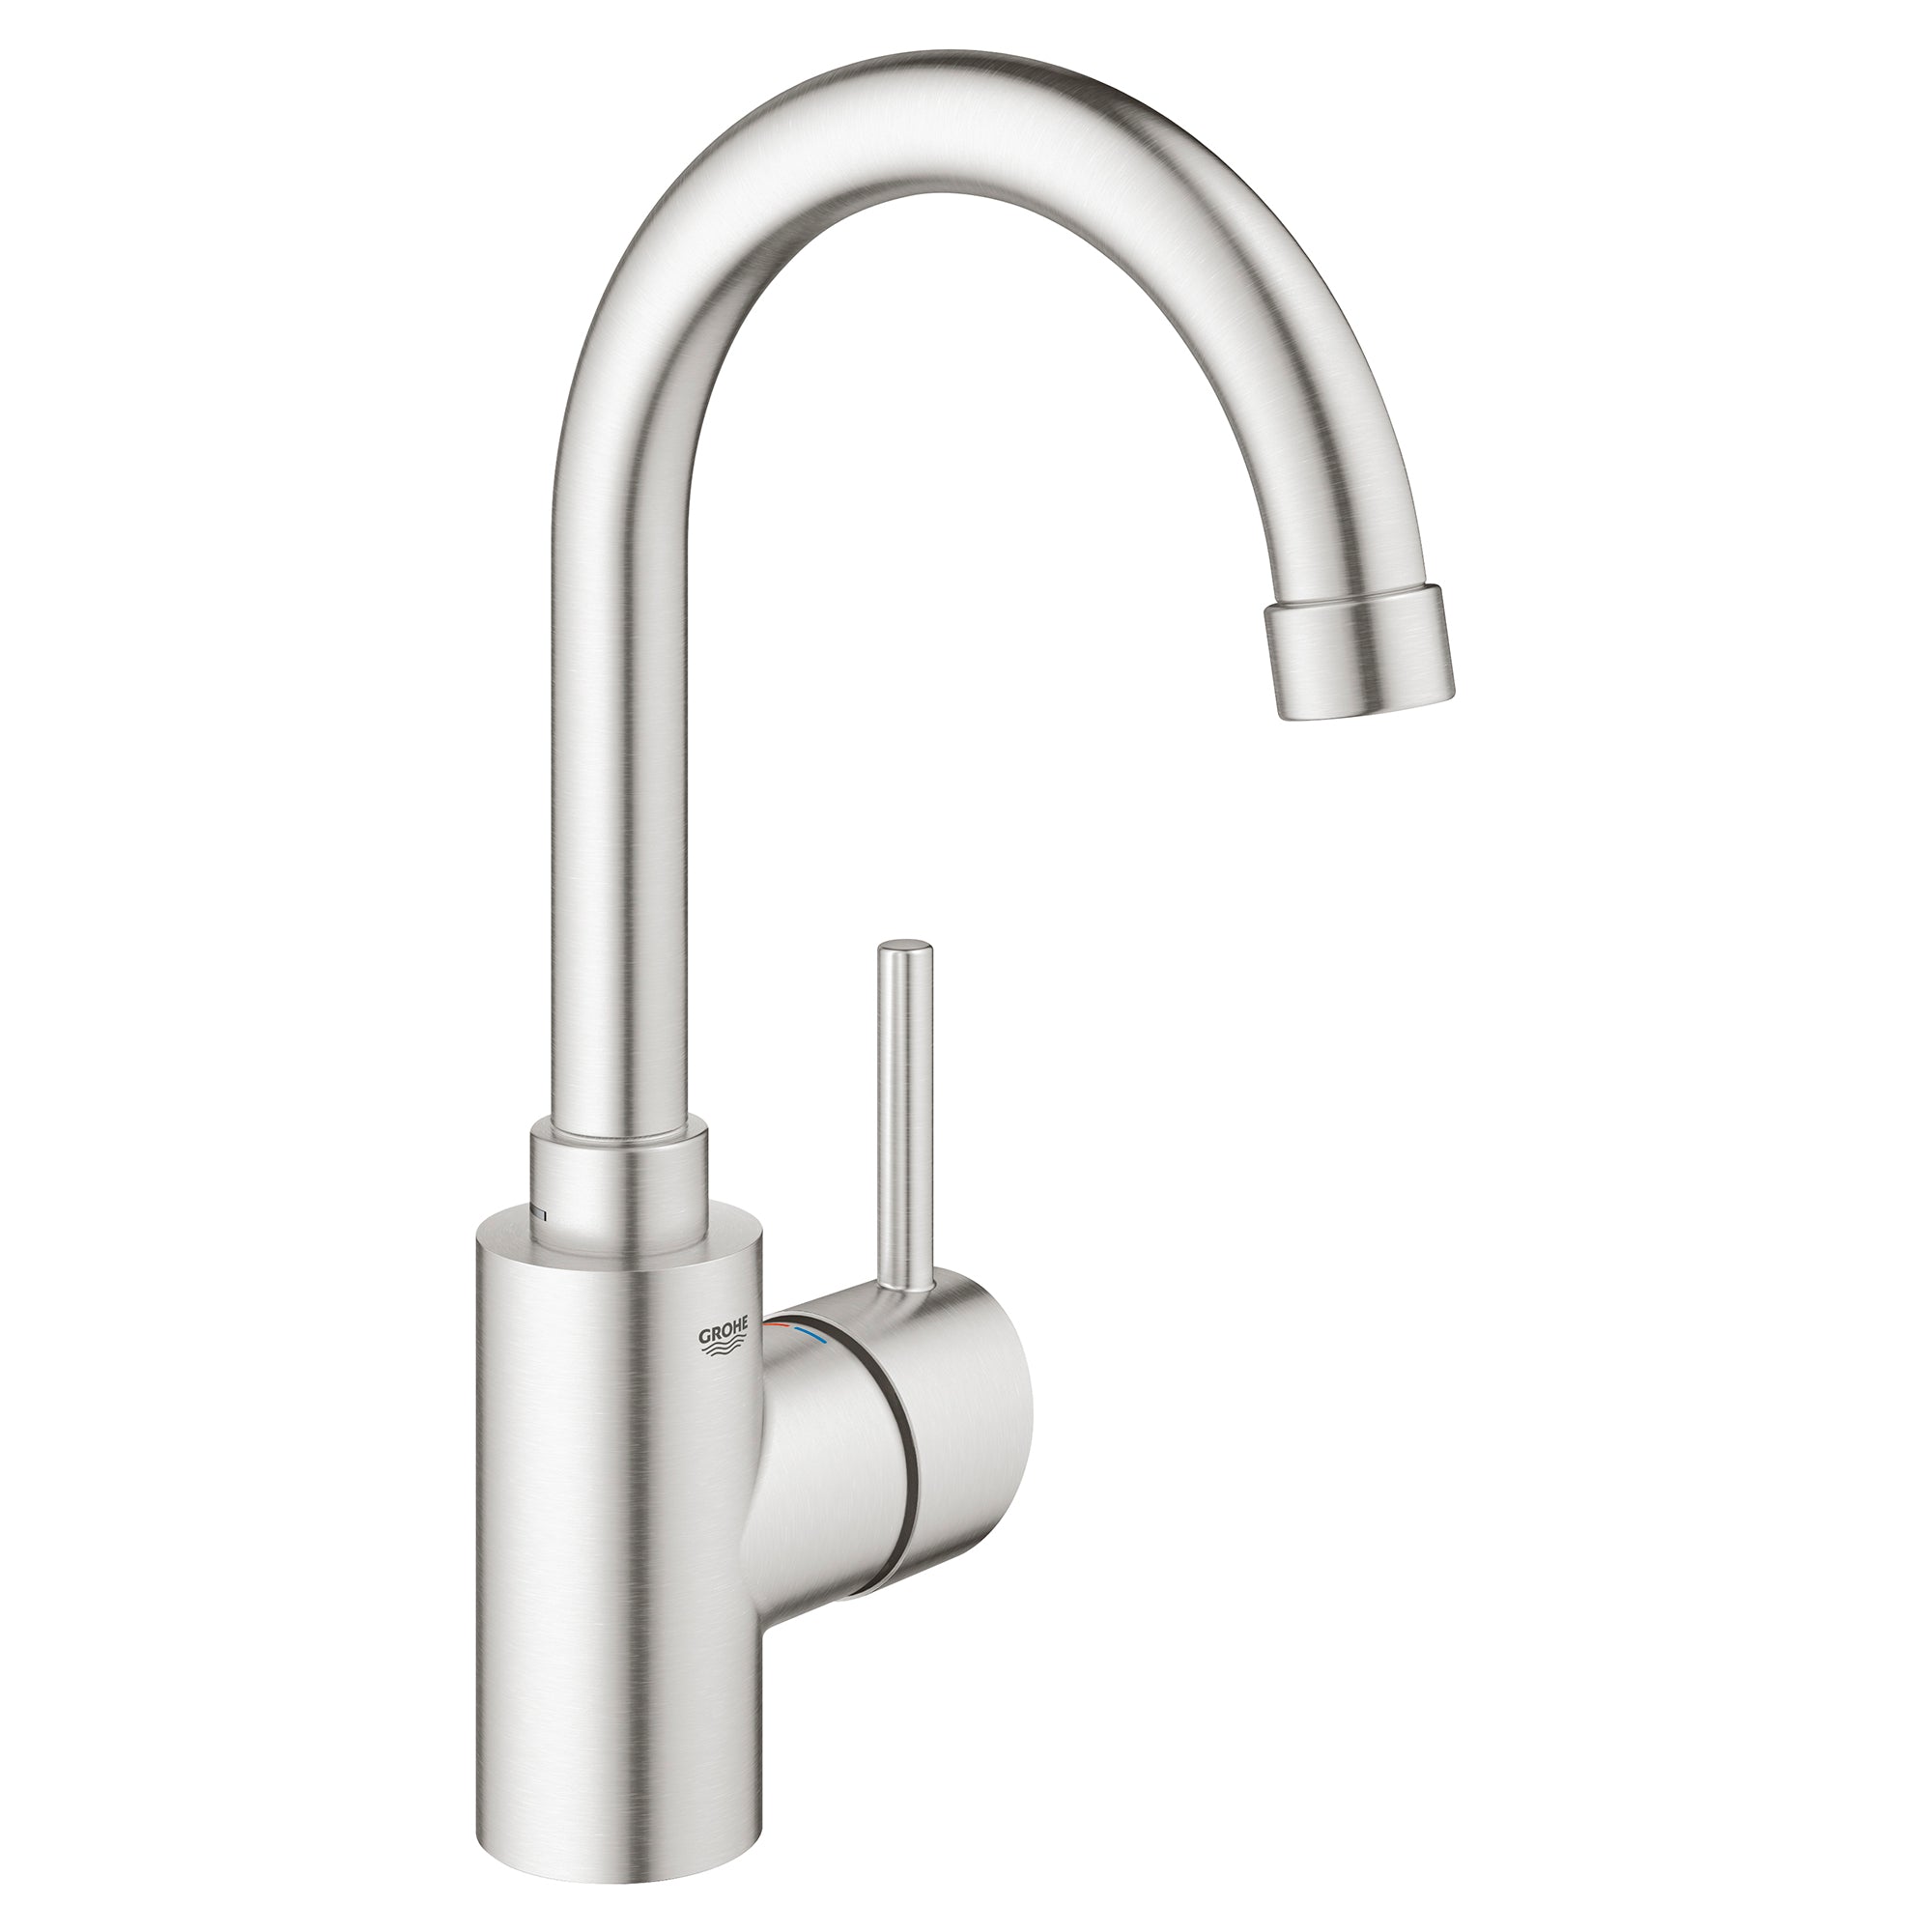 Grohe Concetto Single-Handle Bar Faucet 1.5 GPM